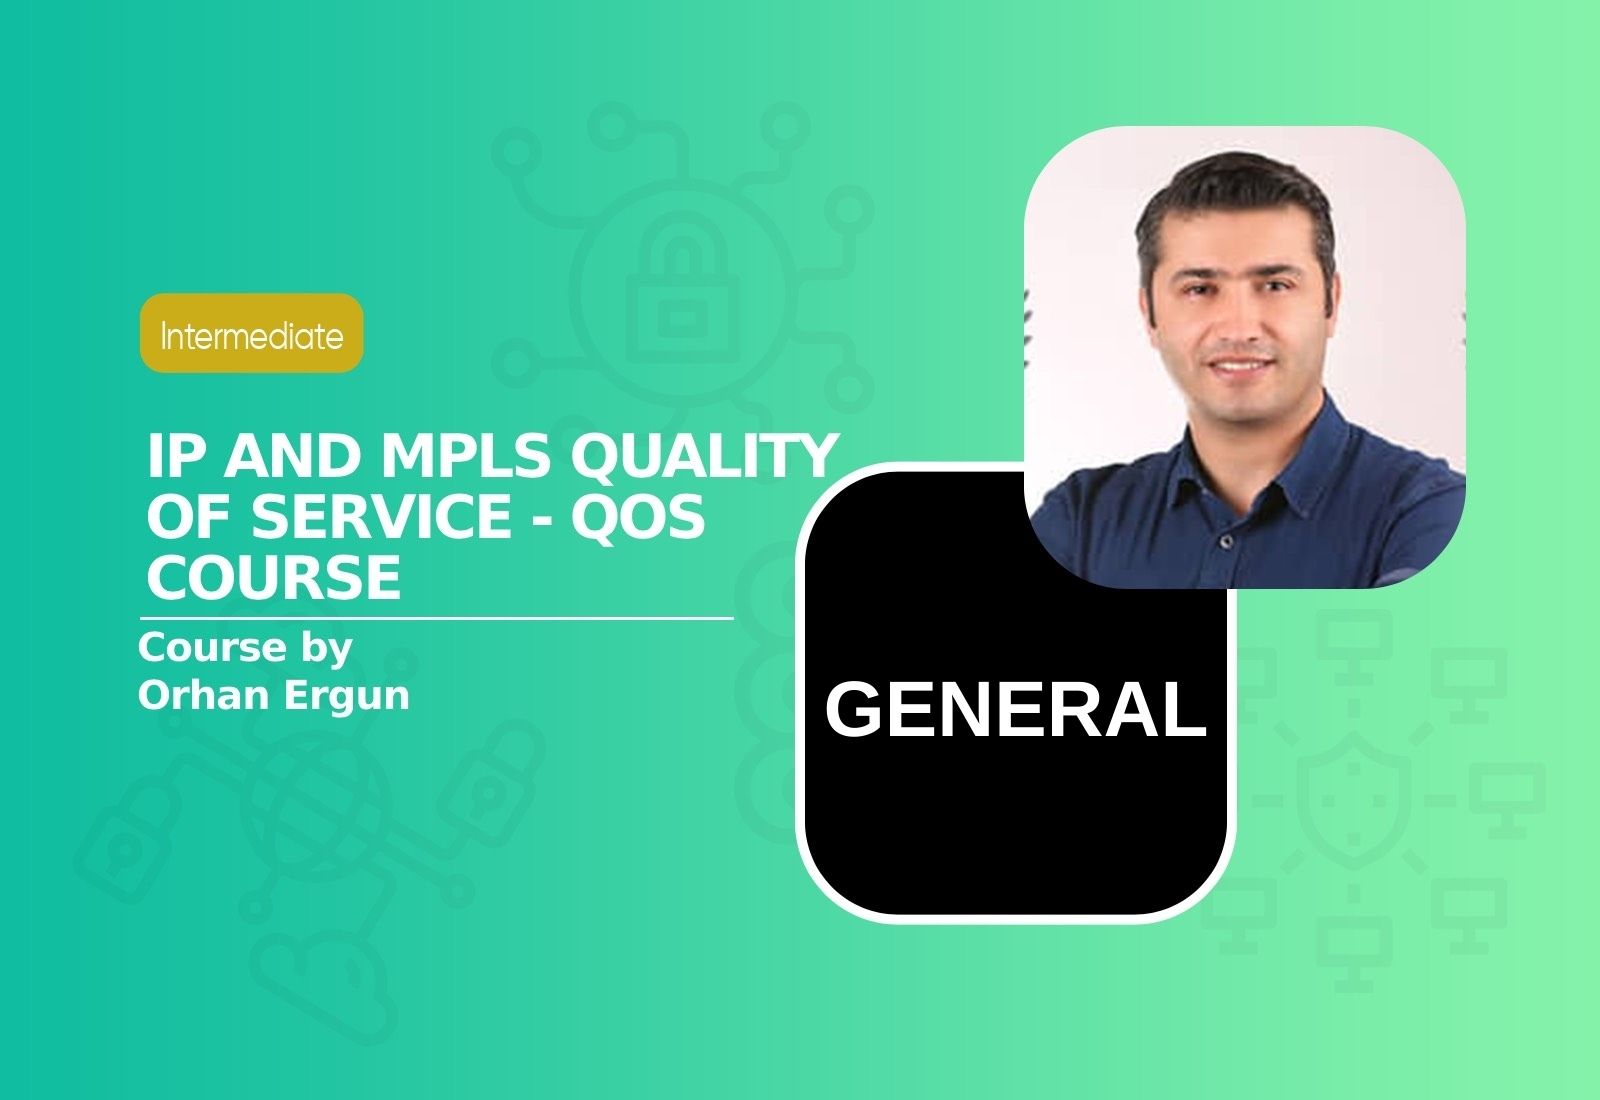 IP and MPLS Quality of Service - QoS Course 